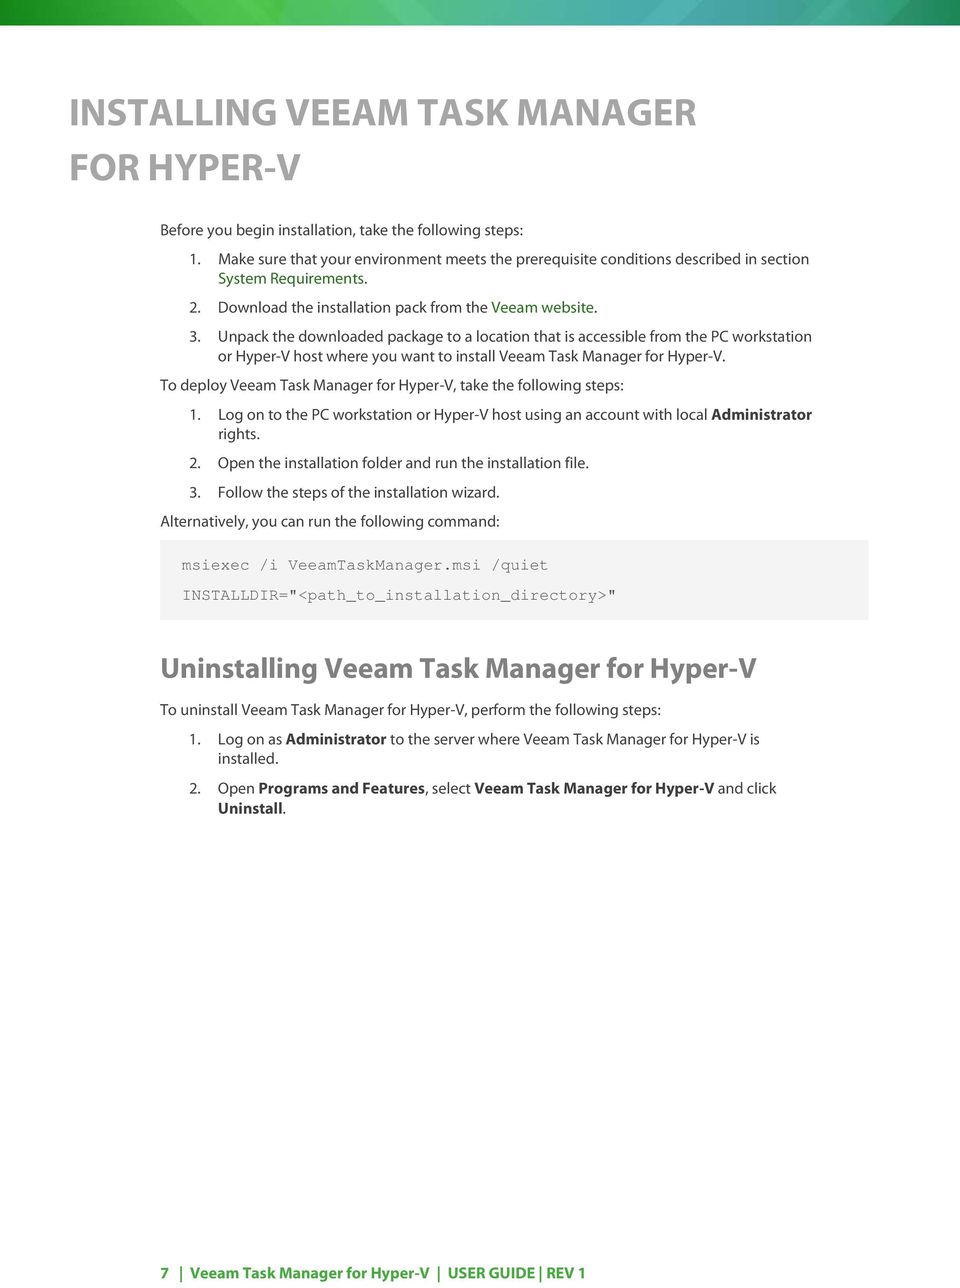 Unpack the downloaded package to a location that is accessible from the PC workstation or Hyper-V host where you want to install Veeam Task Manager for Hyper-V.